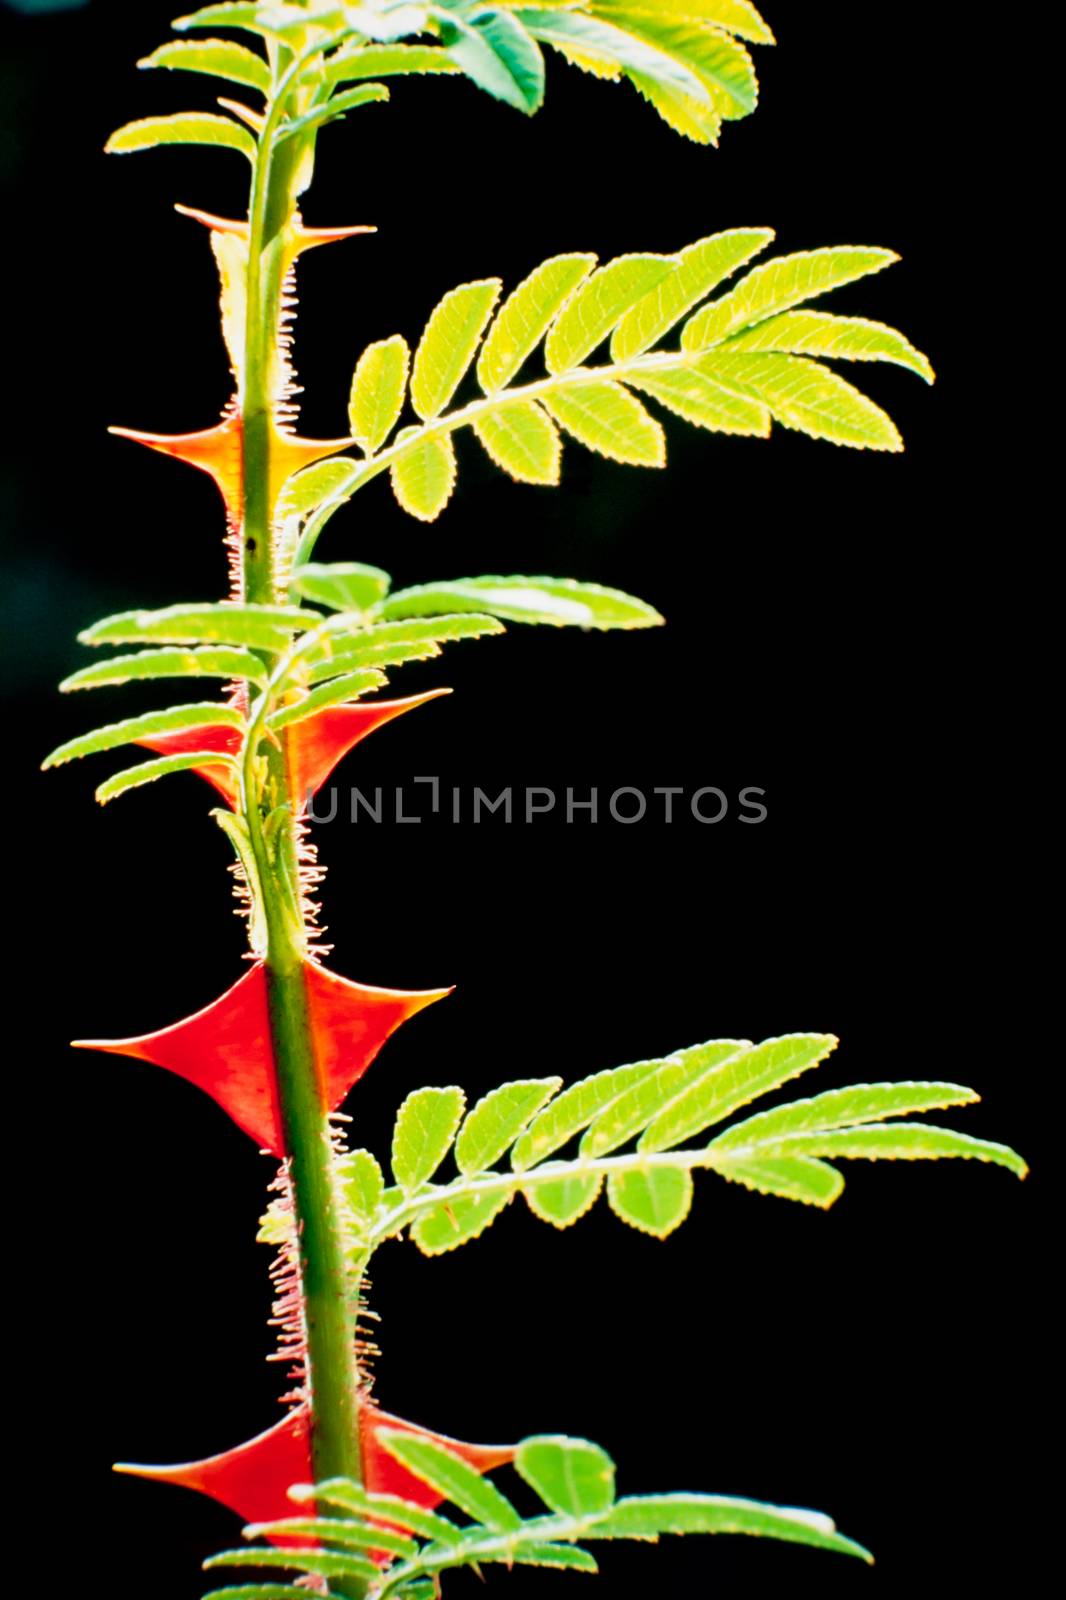 Red thorny rose stem closeup plant detail by PiLens